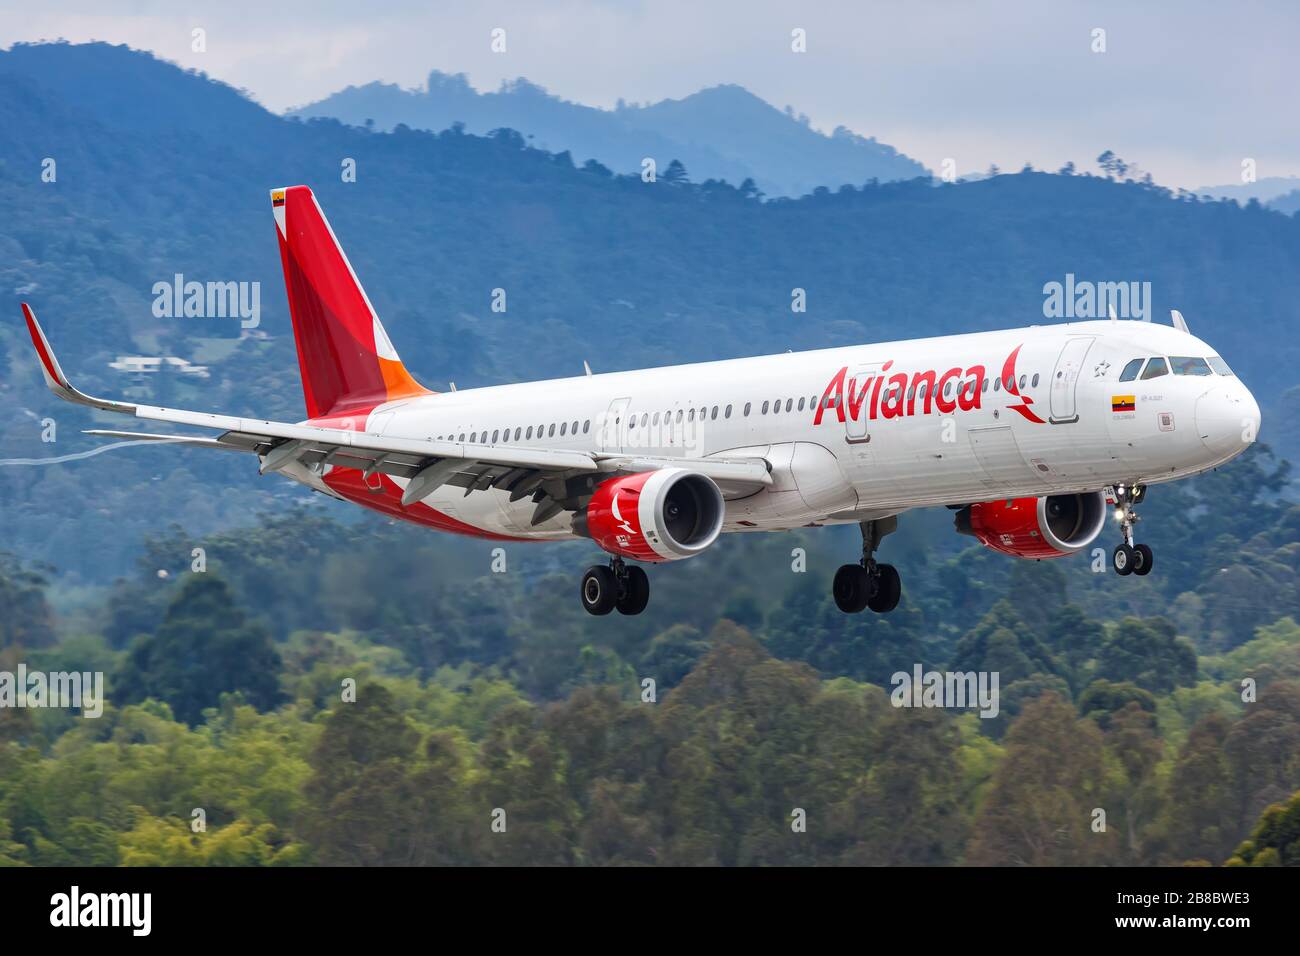 Medellin, Colombia – January 25, 2019: Avianca Airbus A321 airplane at Medellin Rionegro airport (MDE) in Colombia. Airbus is a European aircraft manu Stock Photo